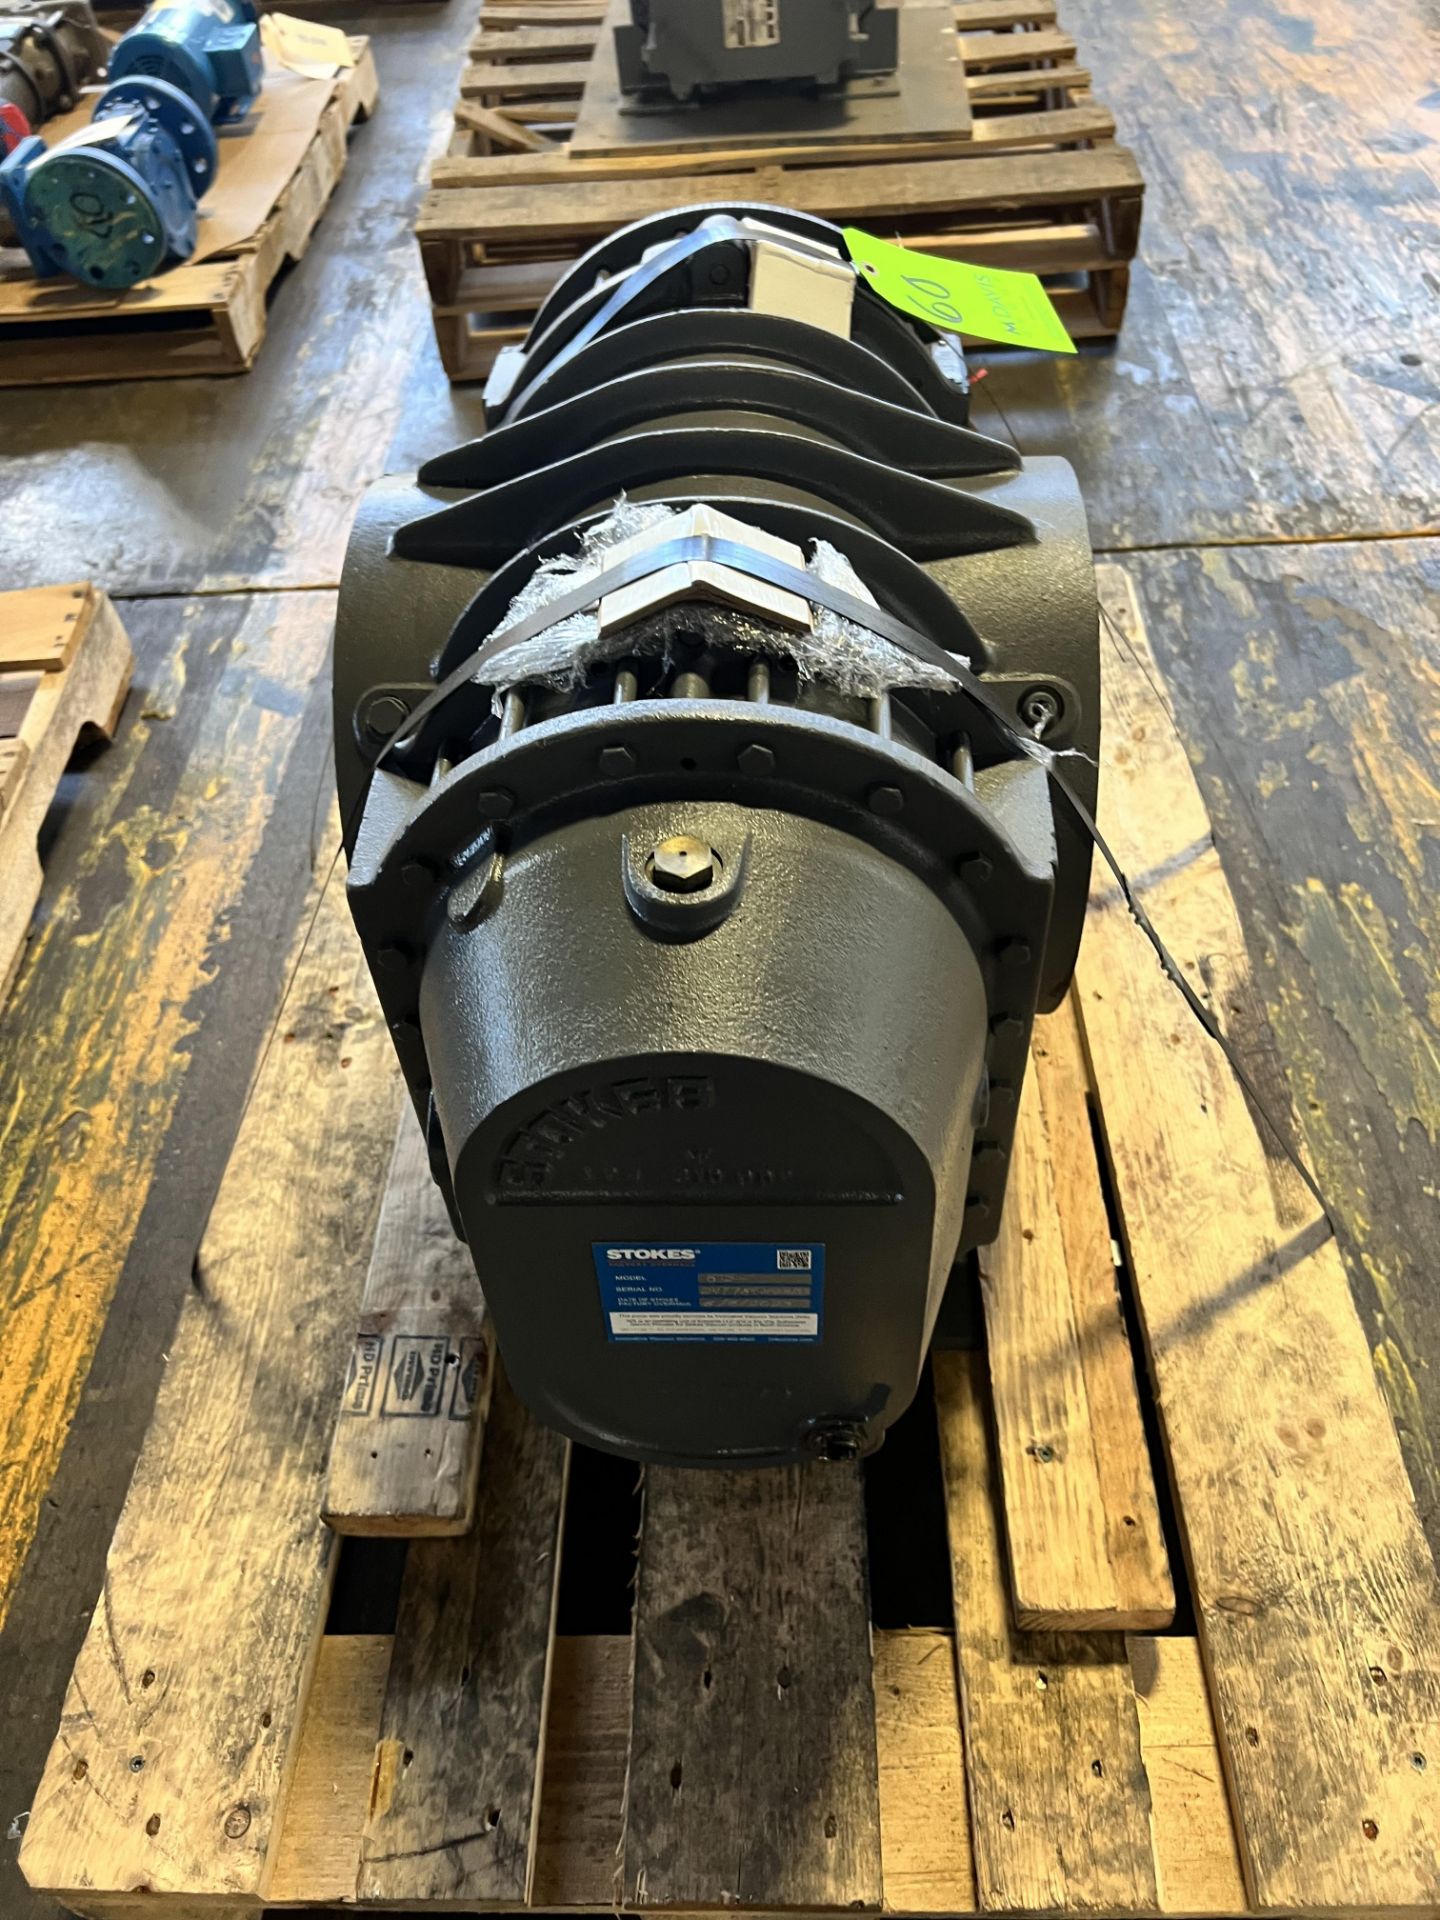 NEW 2023 STOKES EDWARDS VACUUM BLOWER PUMP HEAD, MODEL 615-1, S/N 247784X05/99, CAT NUMBER 7MP, 2050 - Image 3 of 8